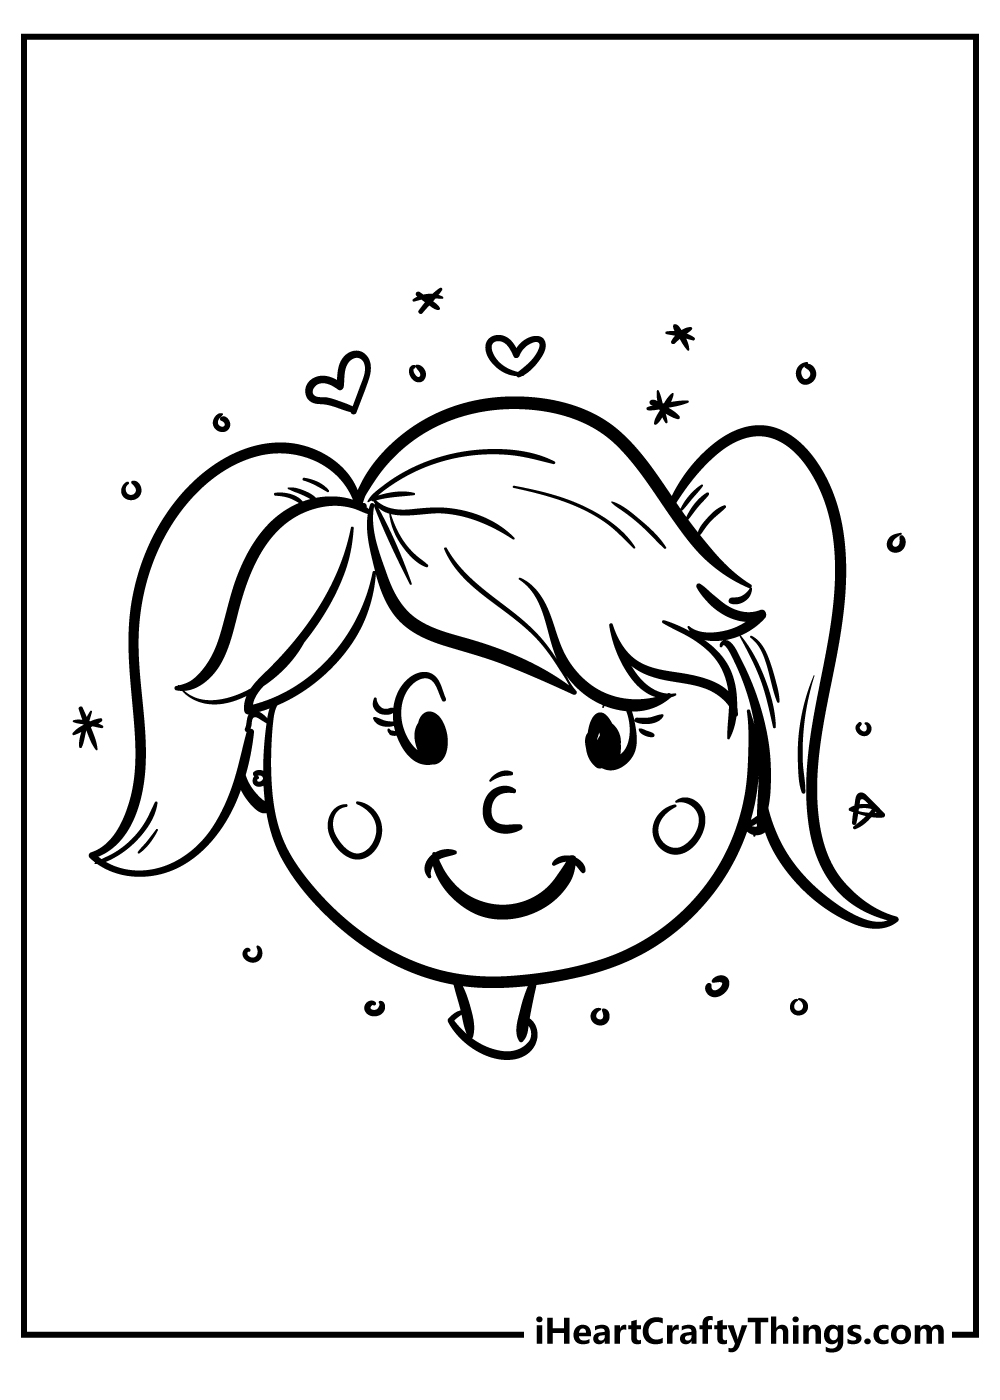 Happy Coloring Book for kids free printable